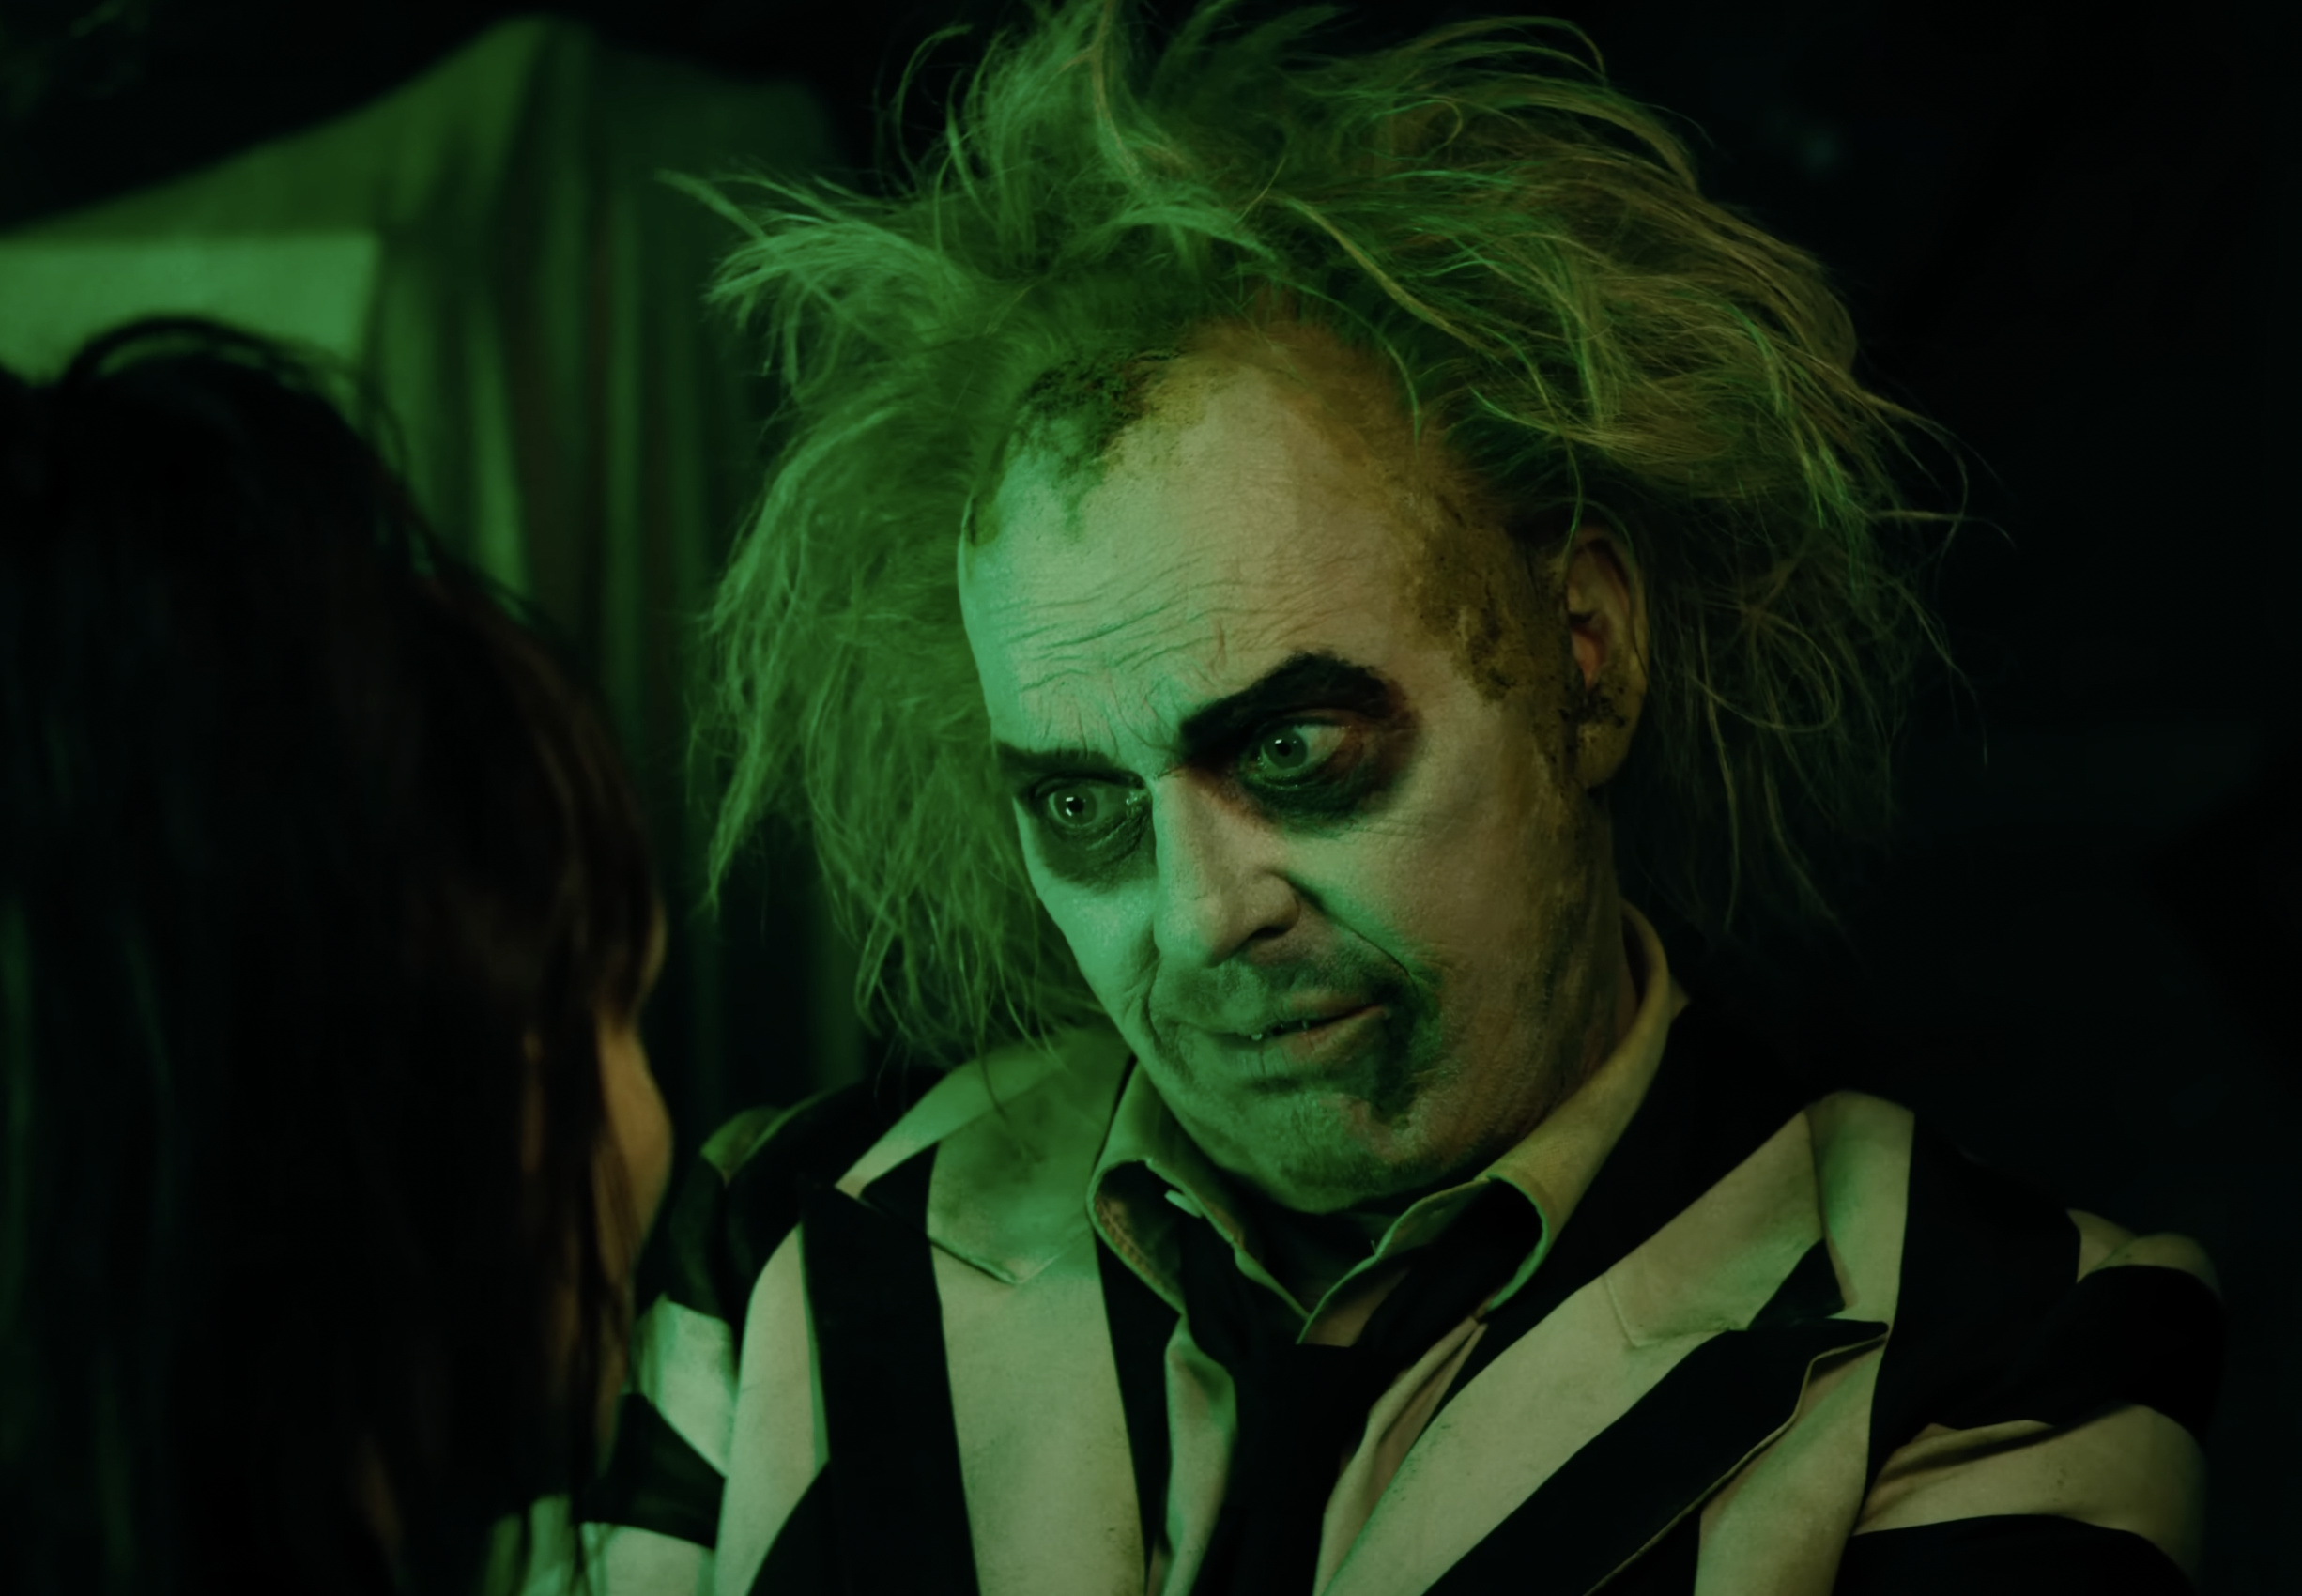 Michael Keaton Says ‘There’s Been So Much Merchandising’ of Beetlejuice and ‘That Was F—ing Weird’ and ‘Off-Putting’